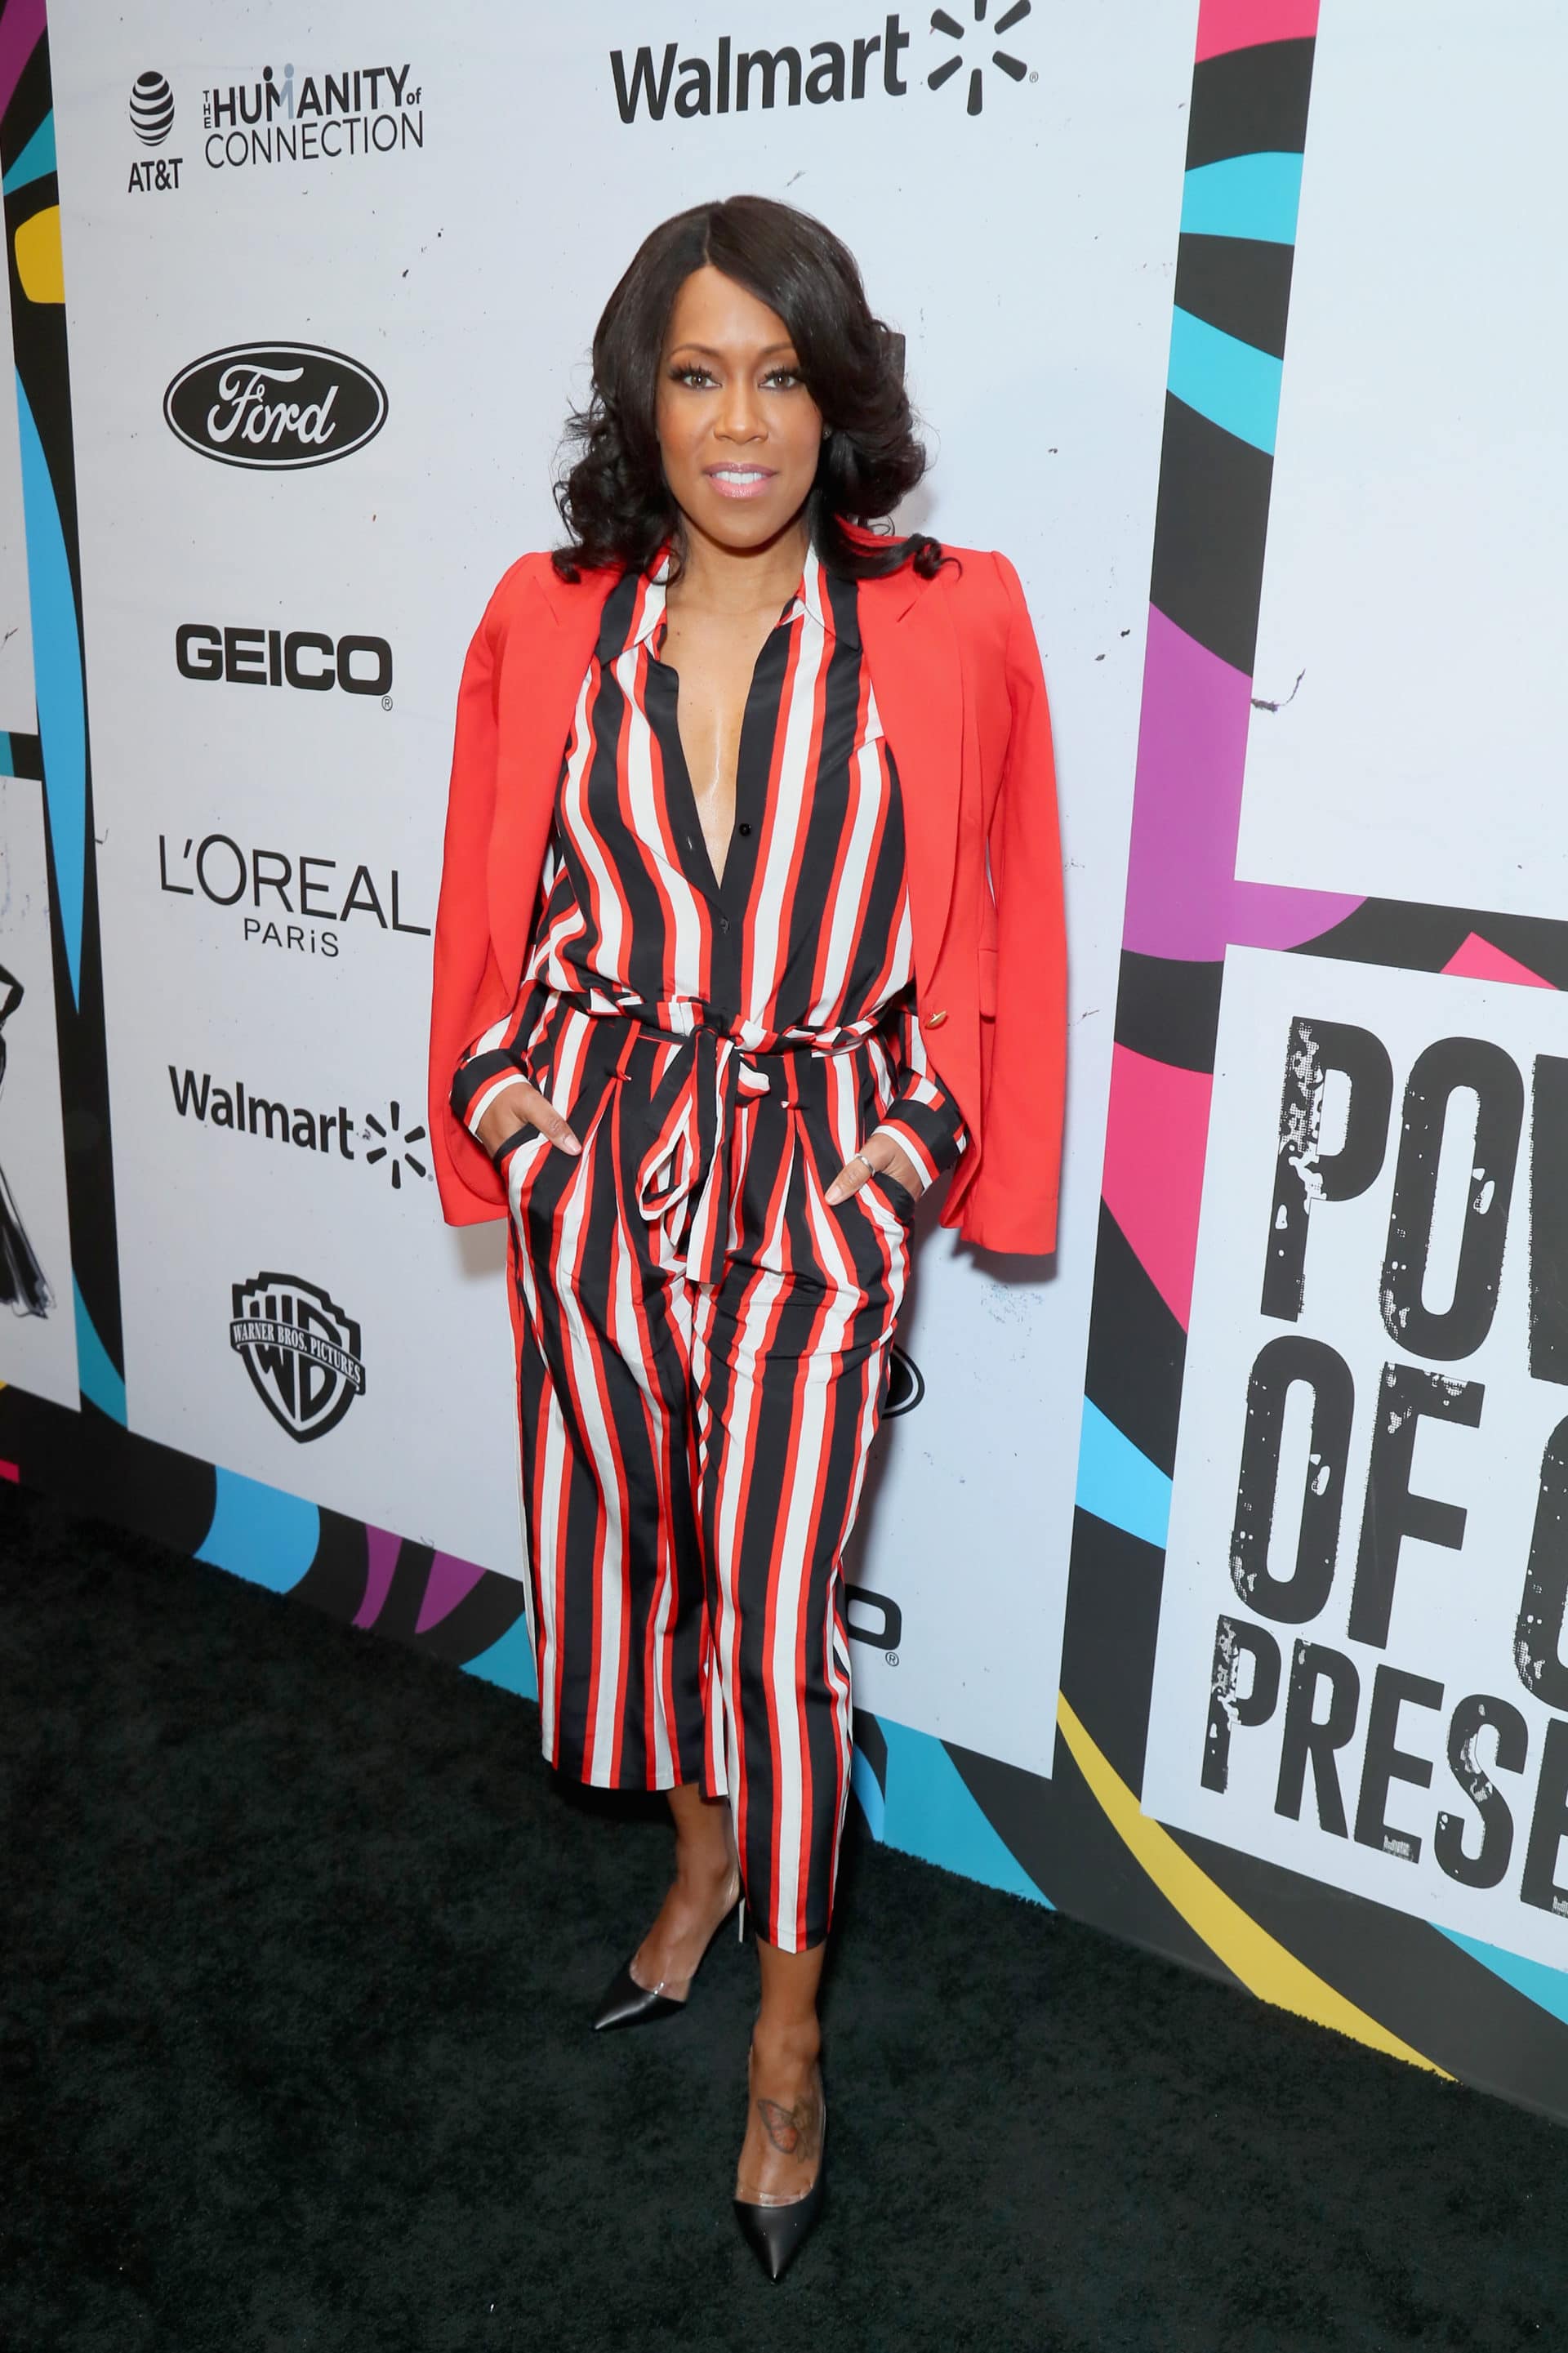 2019 ESSENCE Black Women In Hollywood Awards: The Red Carpet Looks We Just Can't Get Enough Of